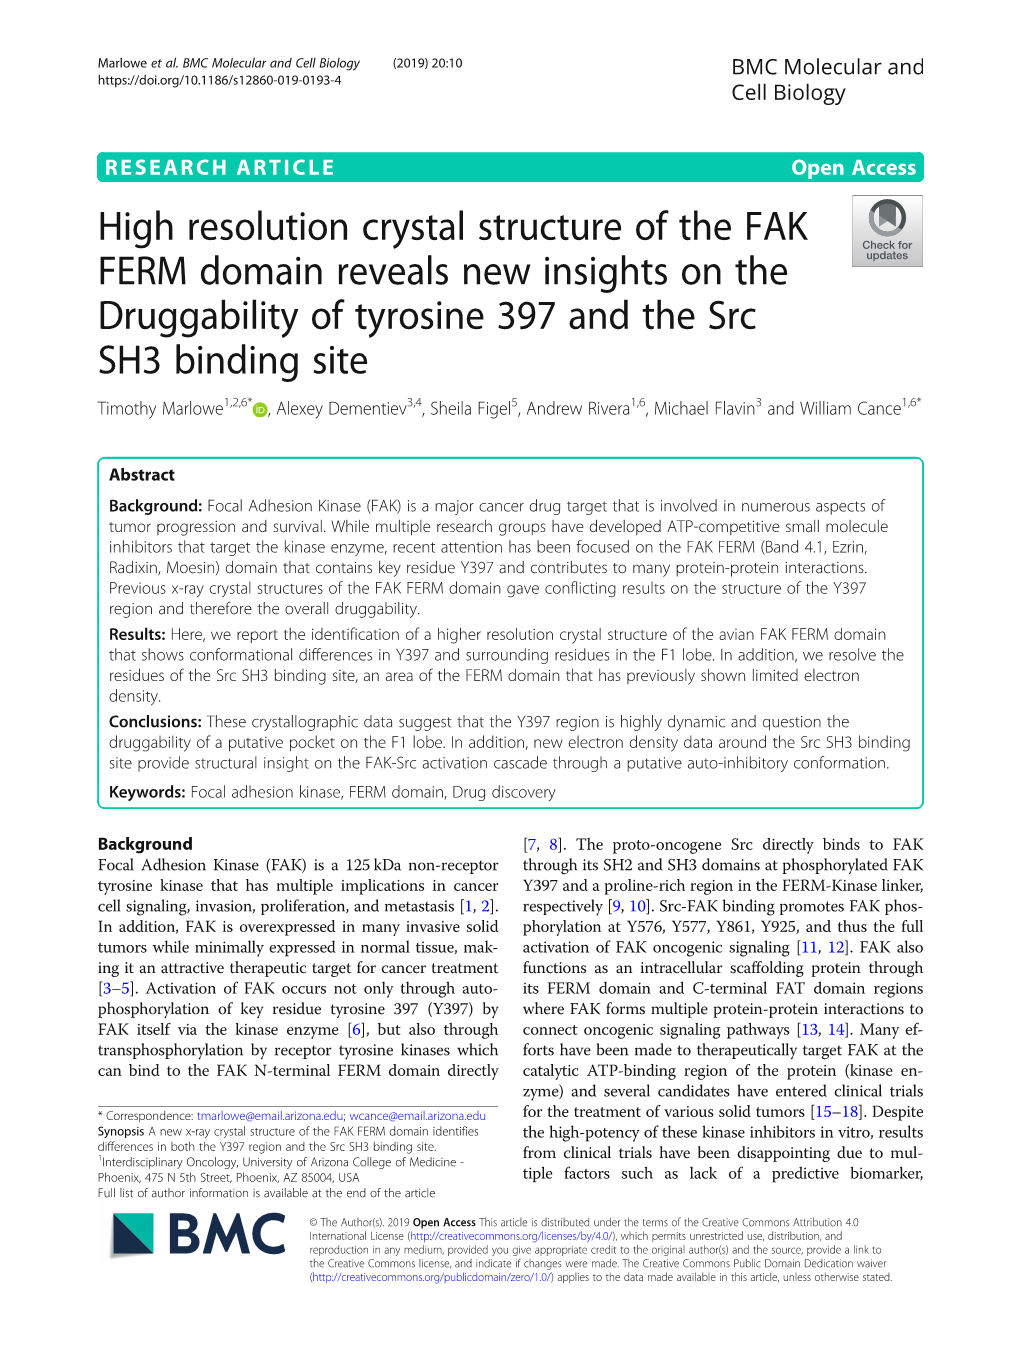 High Resolution Crystal Structure of the FAK FERM Domain Reveals New